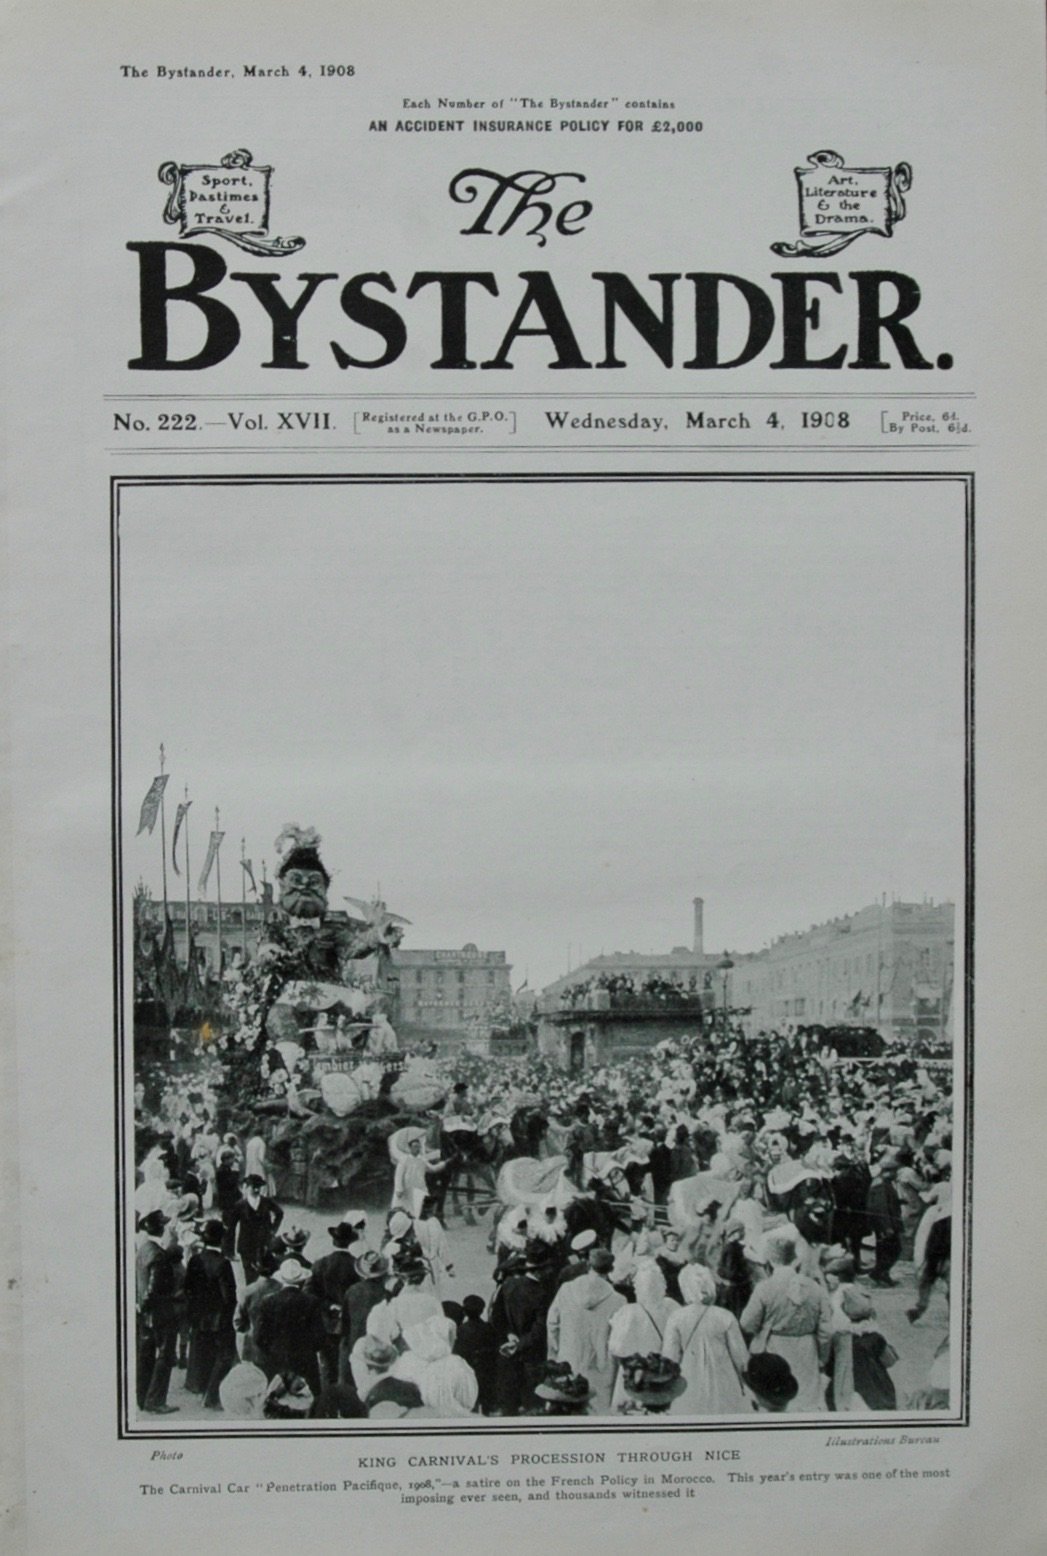 The Bystander Title Page